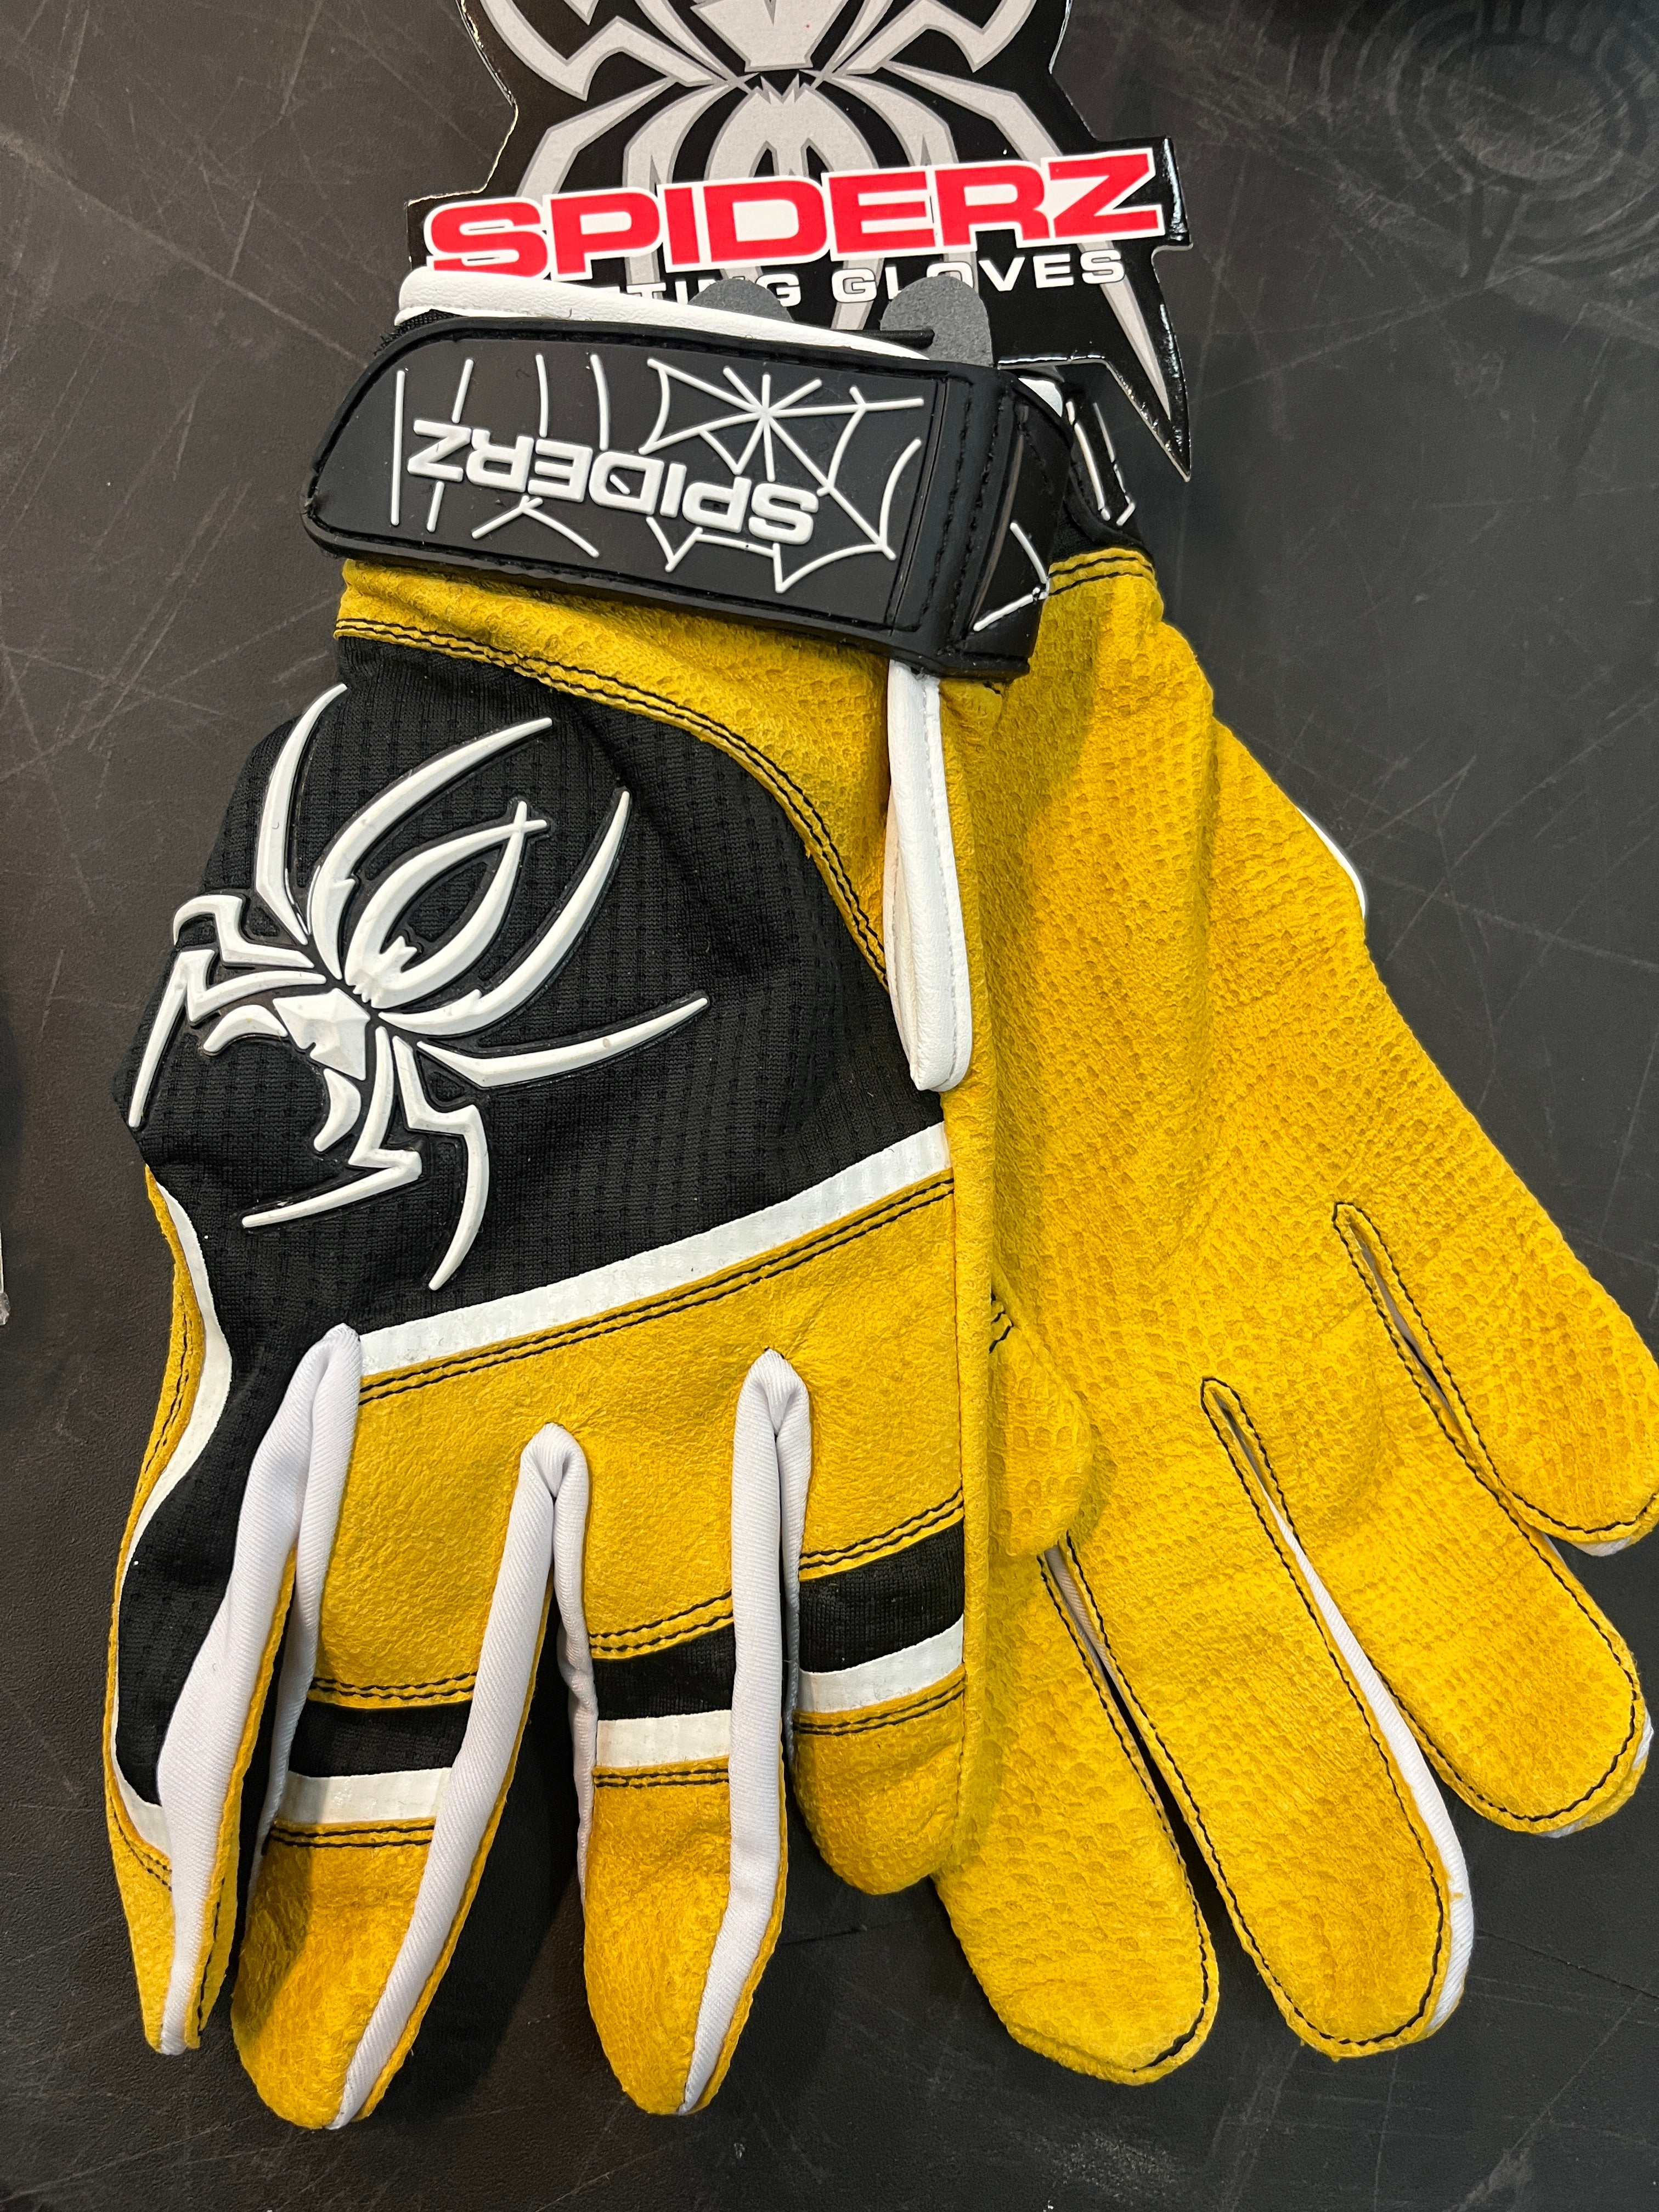 '24 Spiderz Pro Batting Gloves - CANES Limited Edition